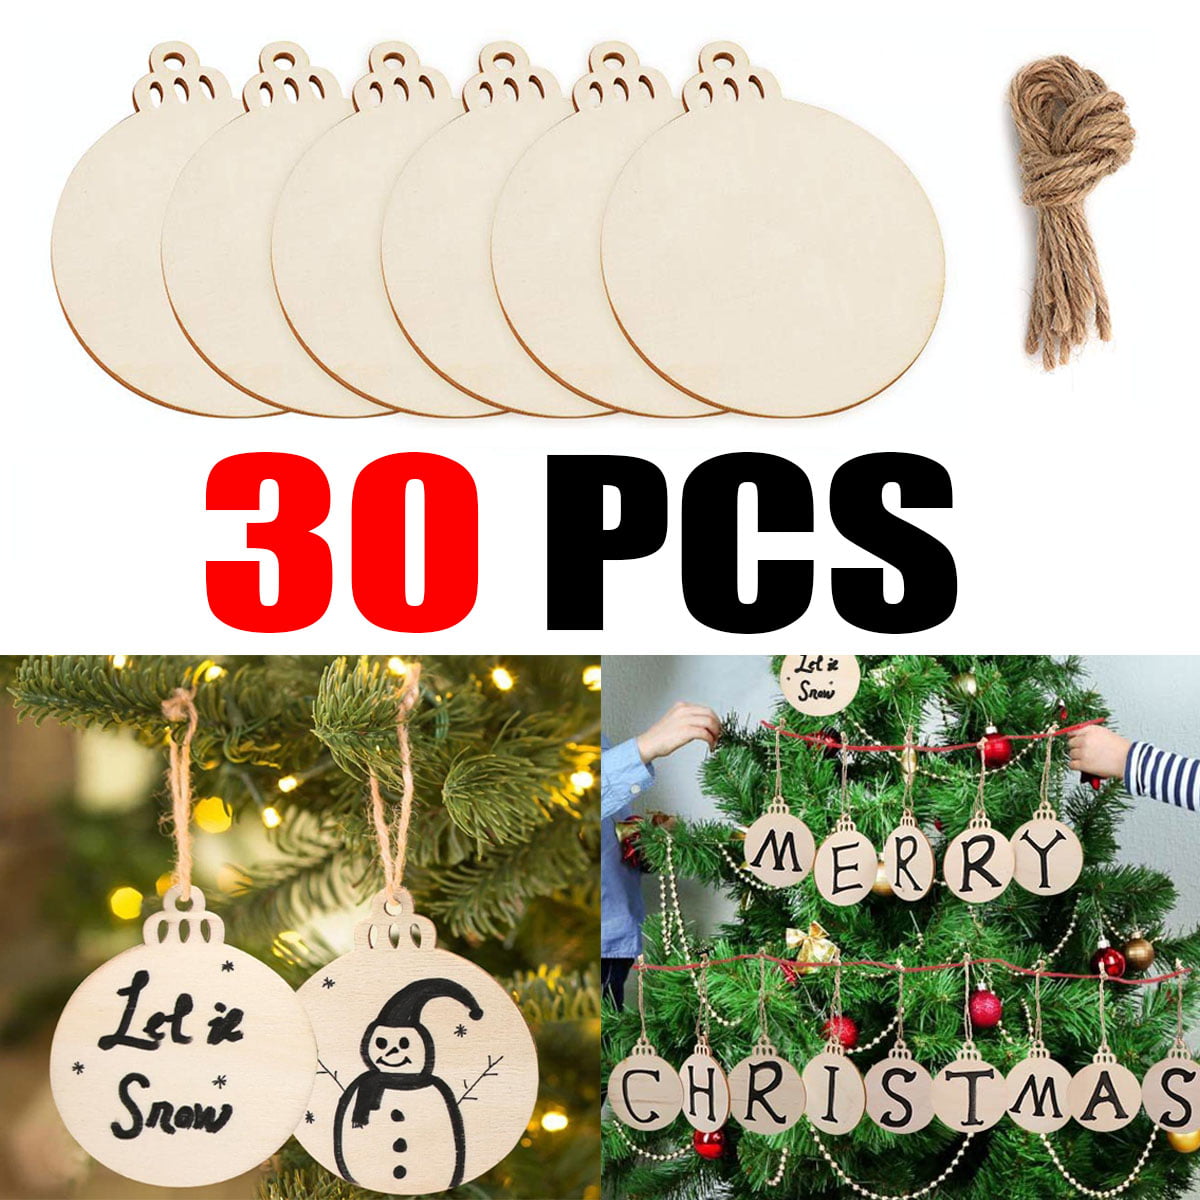 450 Pieces Unfinished Wood Christmas Ornaments DIY Craft and Card Making Aweyka Wooden Slices Different Shapes Handmade Christmas Series Embellishments with 6 Colors Pigment for Christmas Decoration